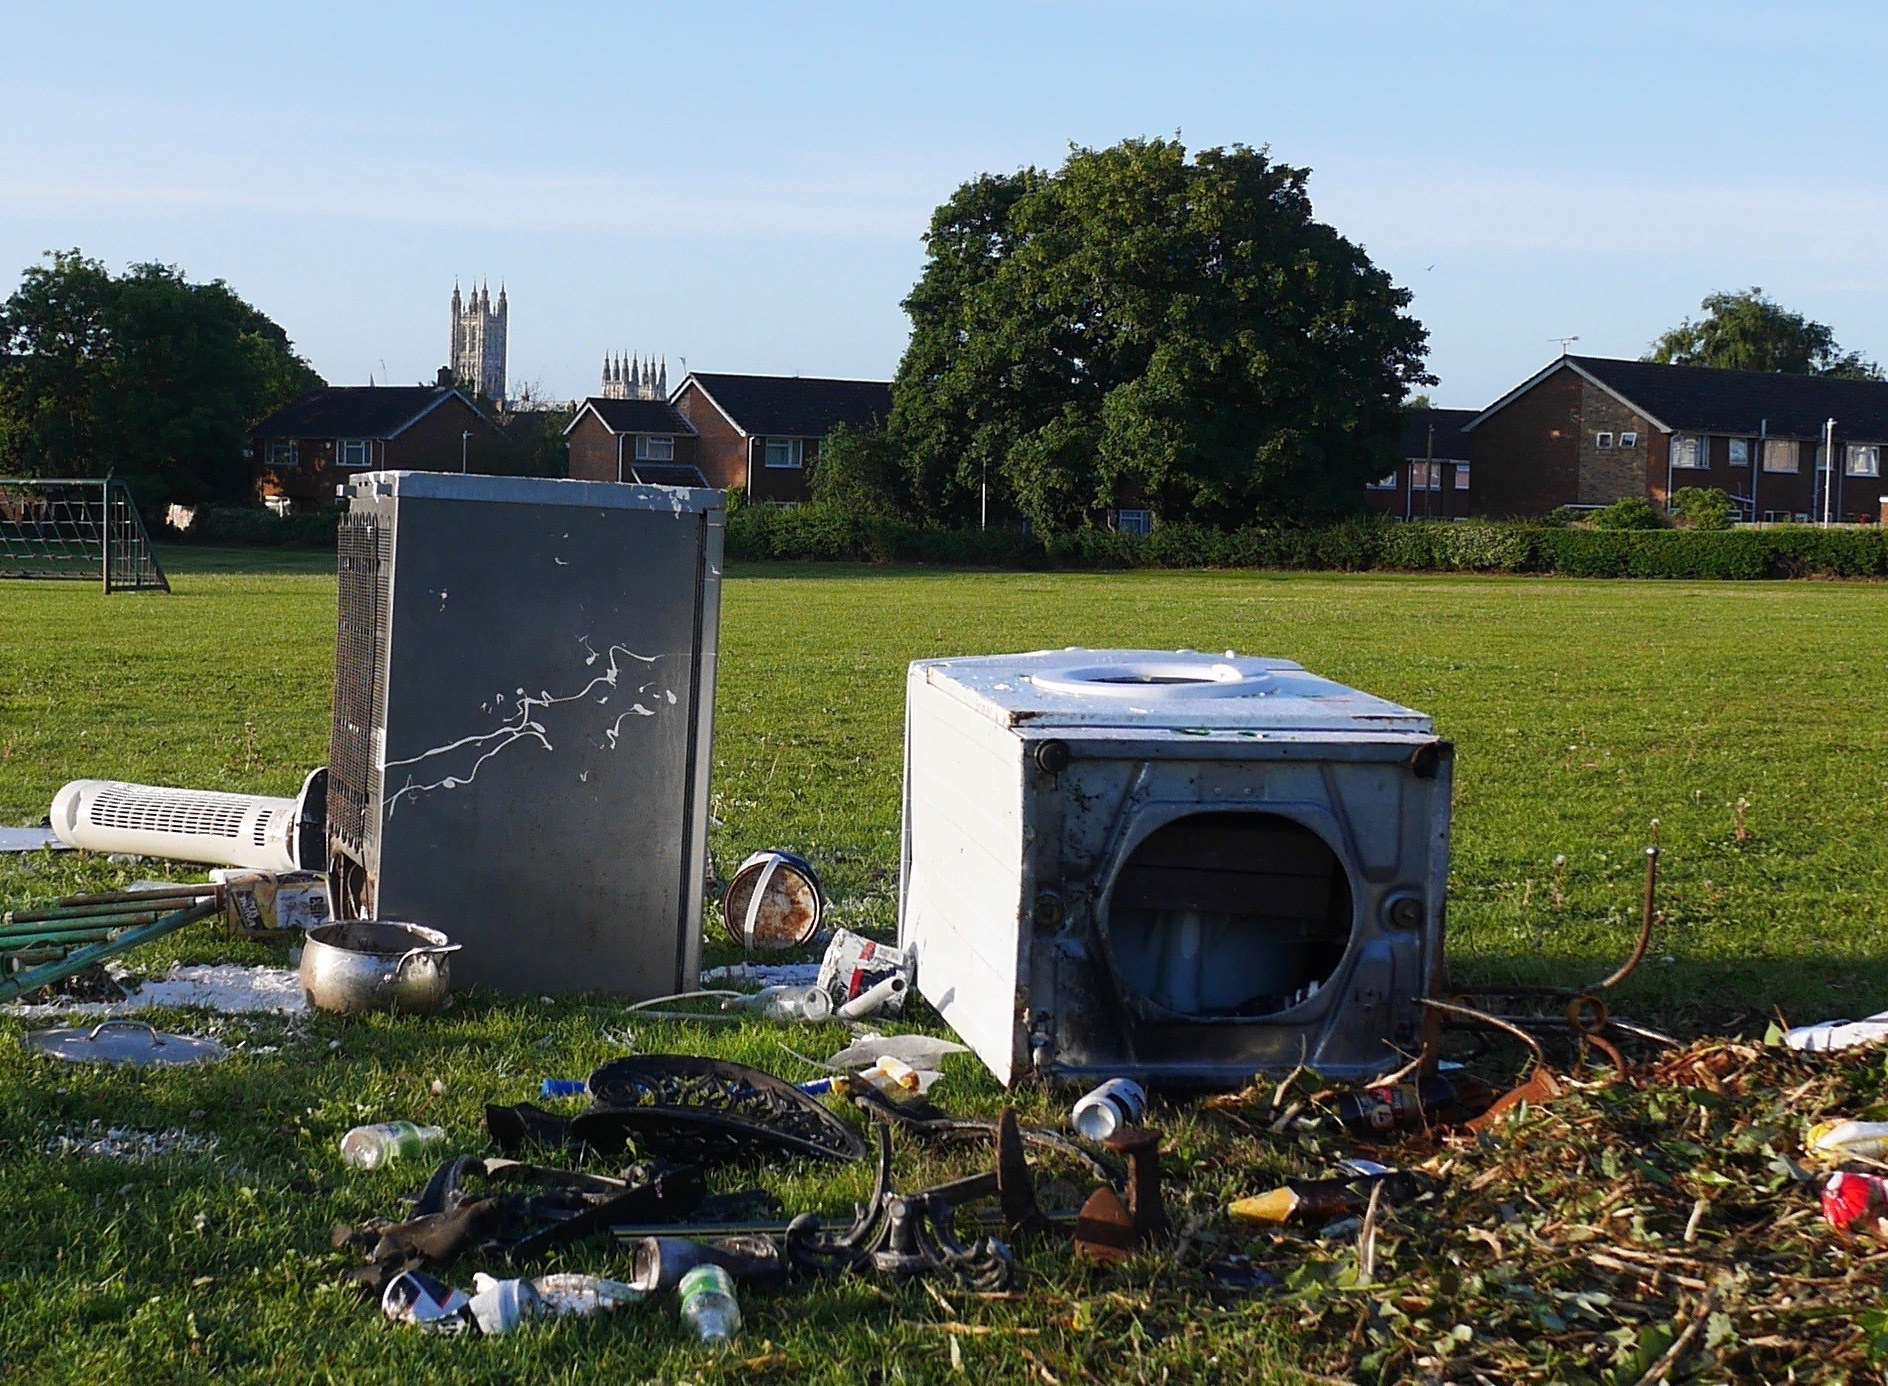 Unwanted electrical items left by travellers at the popular open space.